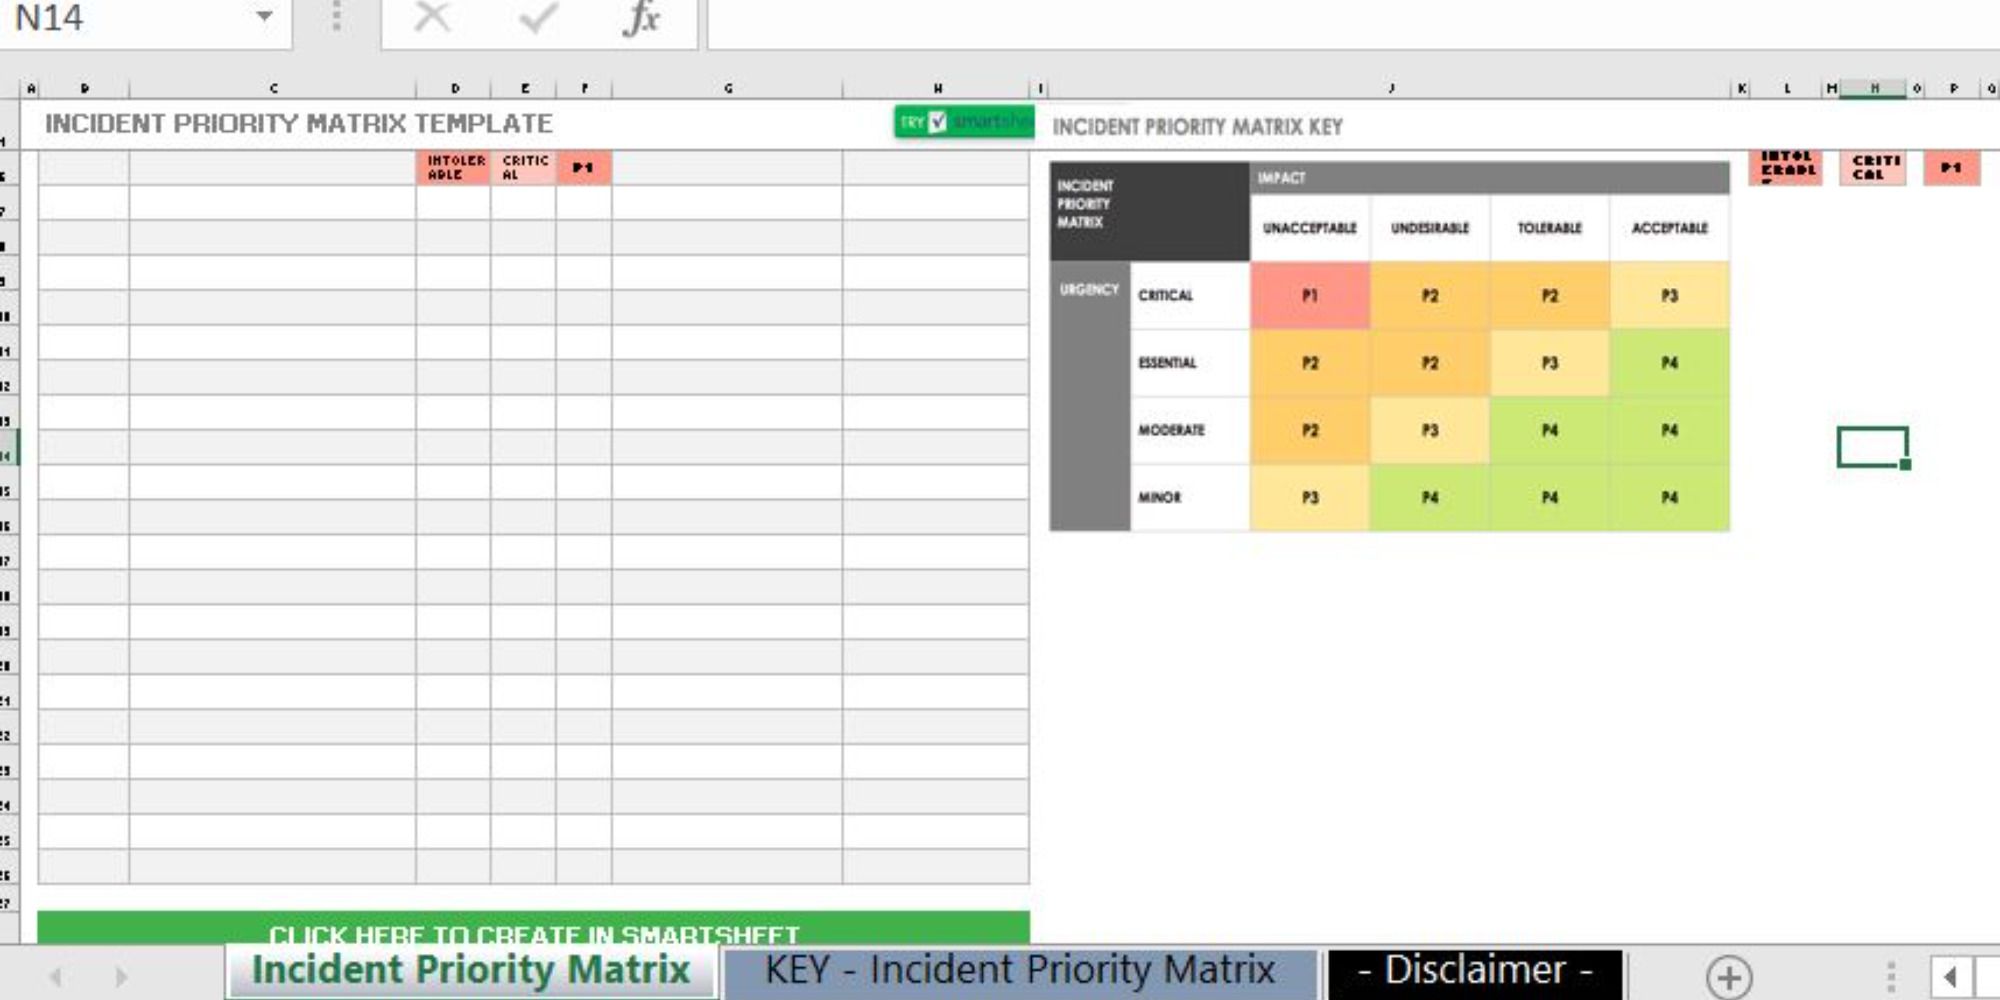 Incident Priority Matrix template for incident management